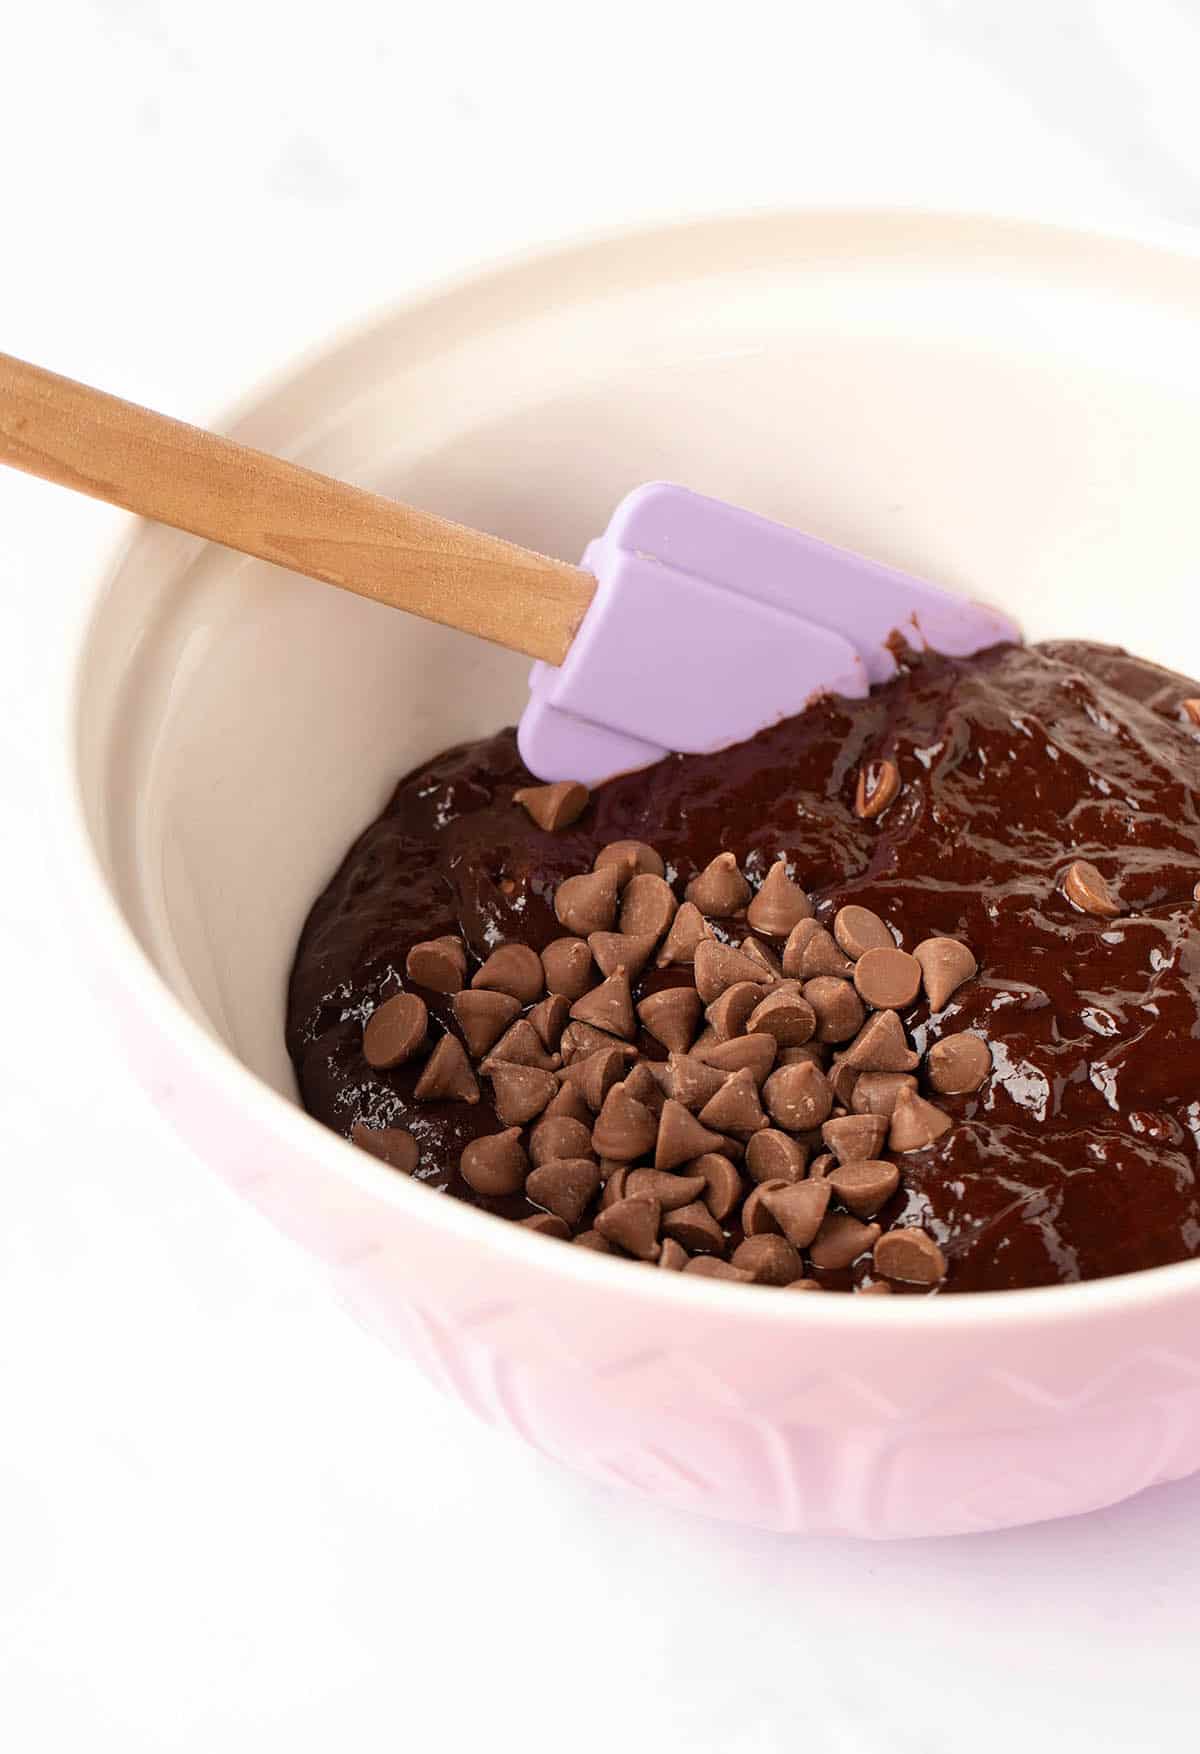 A pink mixing bowl filled with chocolate brownie batter.